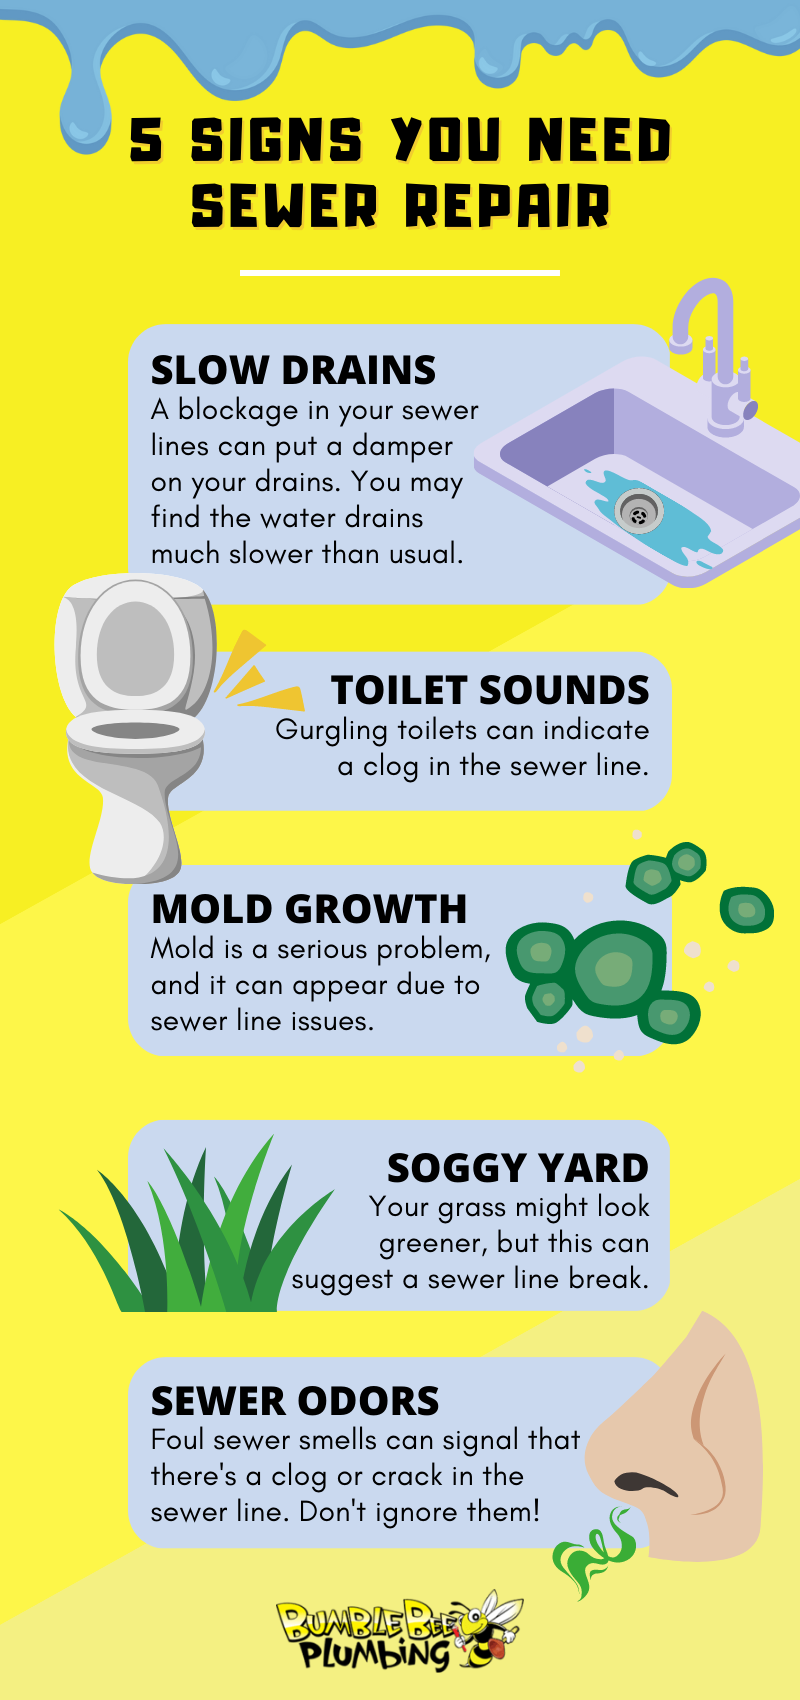 Five-Signs-You-Need-Sewer-Repair